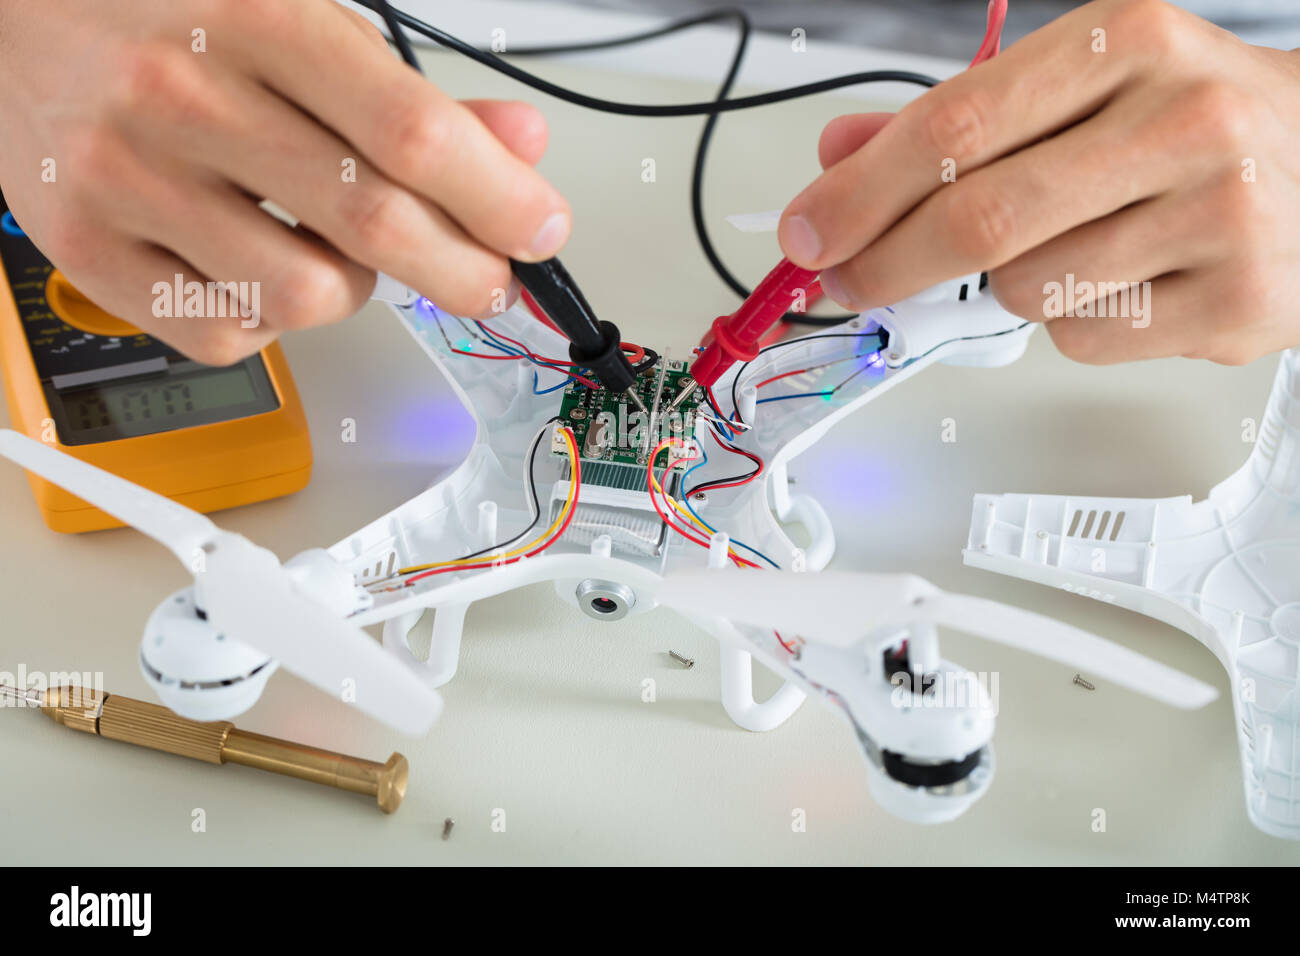 Close-up Of A Man Testing Electric Current Of Disassembled Drone Using Multimeter Tool Stock Photo